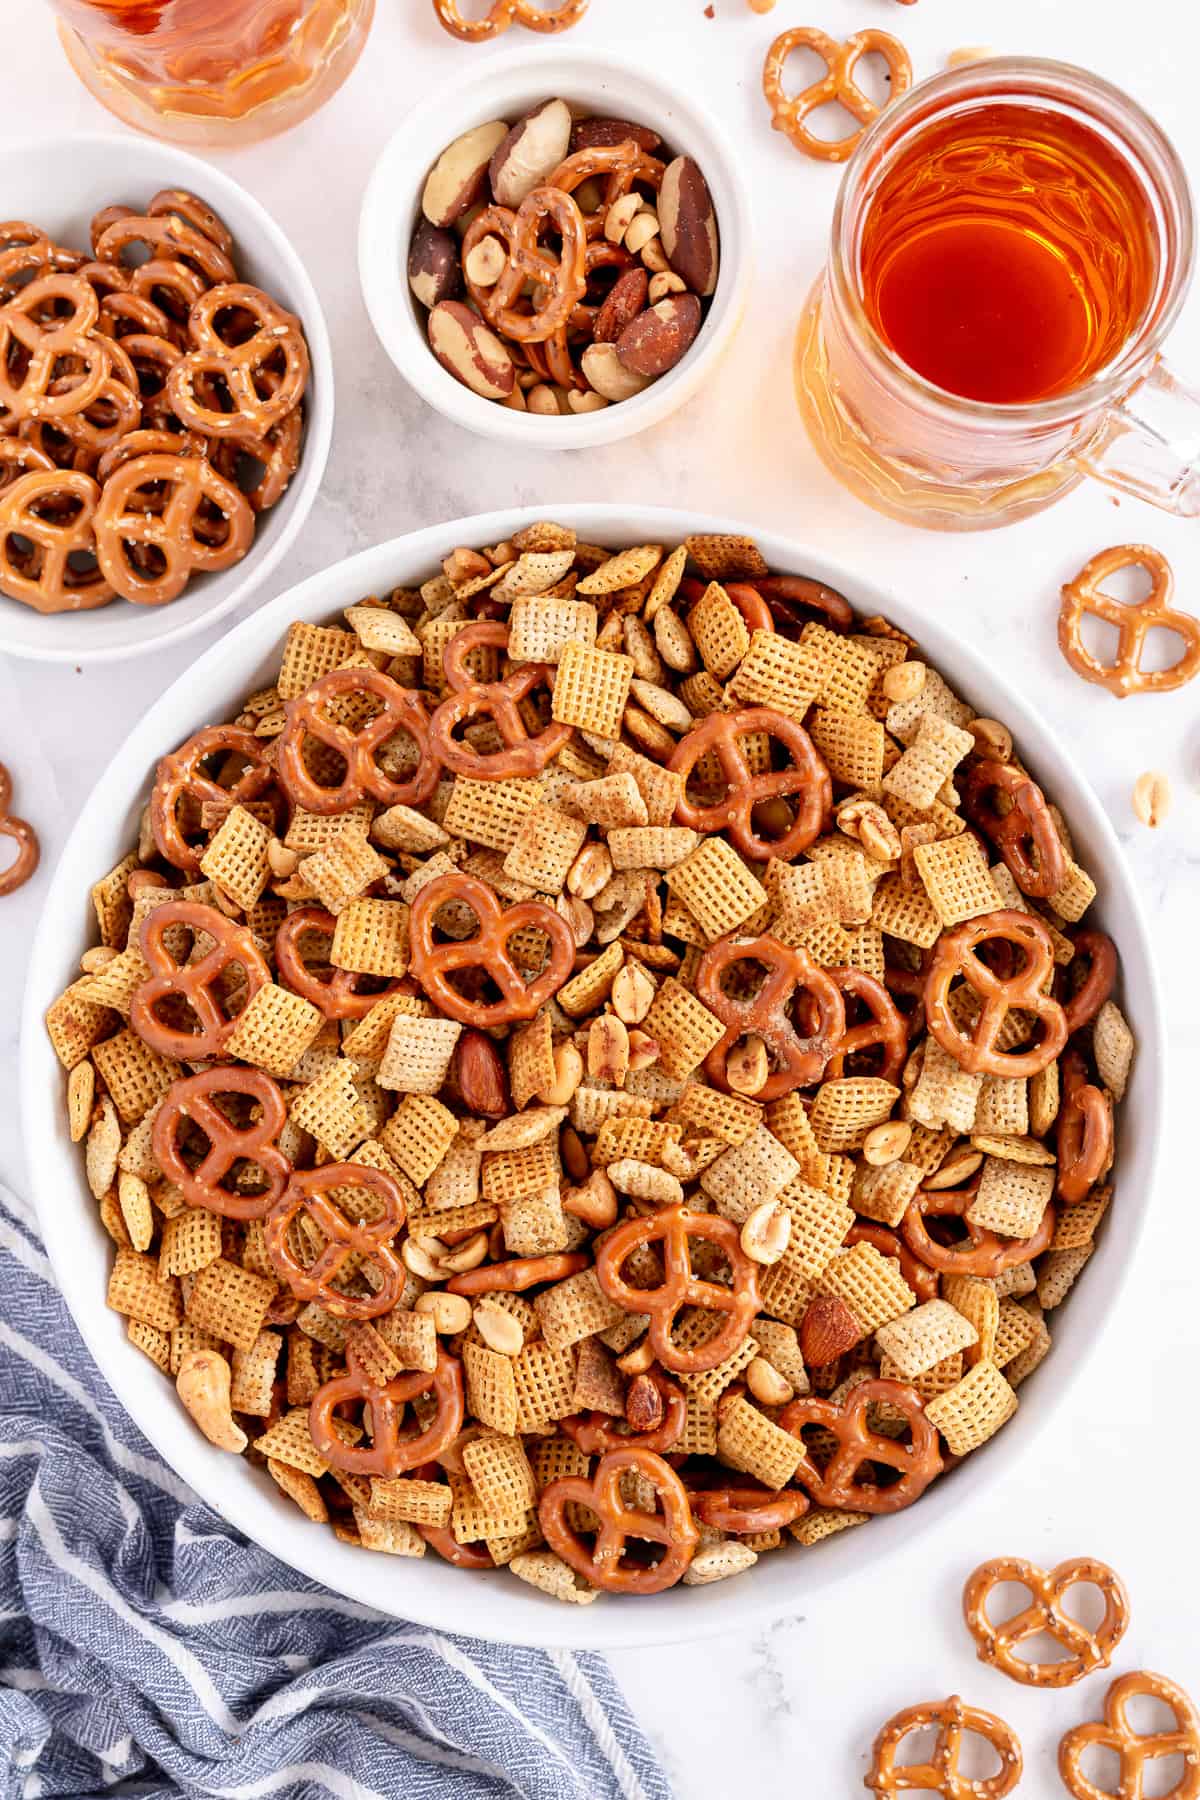 An over the top shot of Chex Mix in a large white bowl.